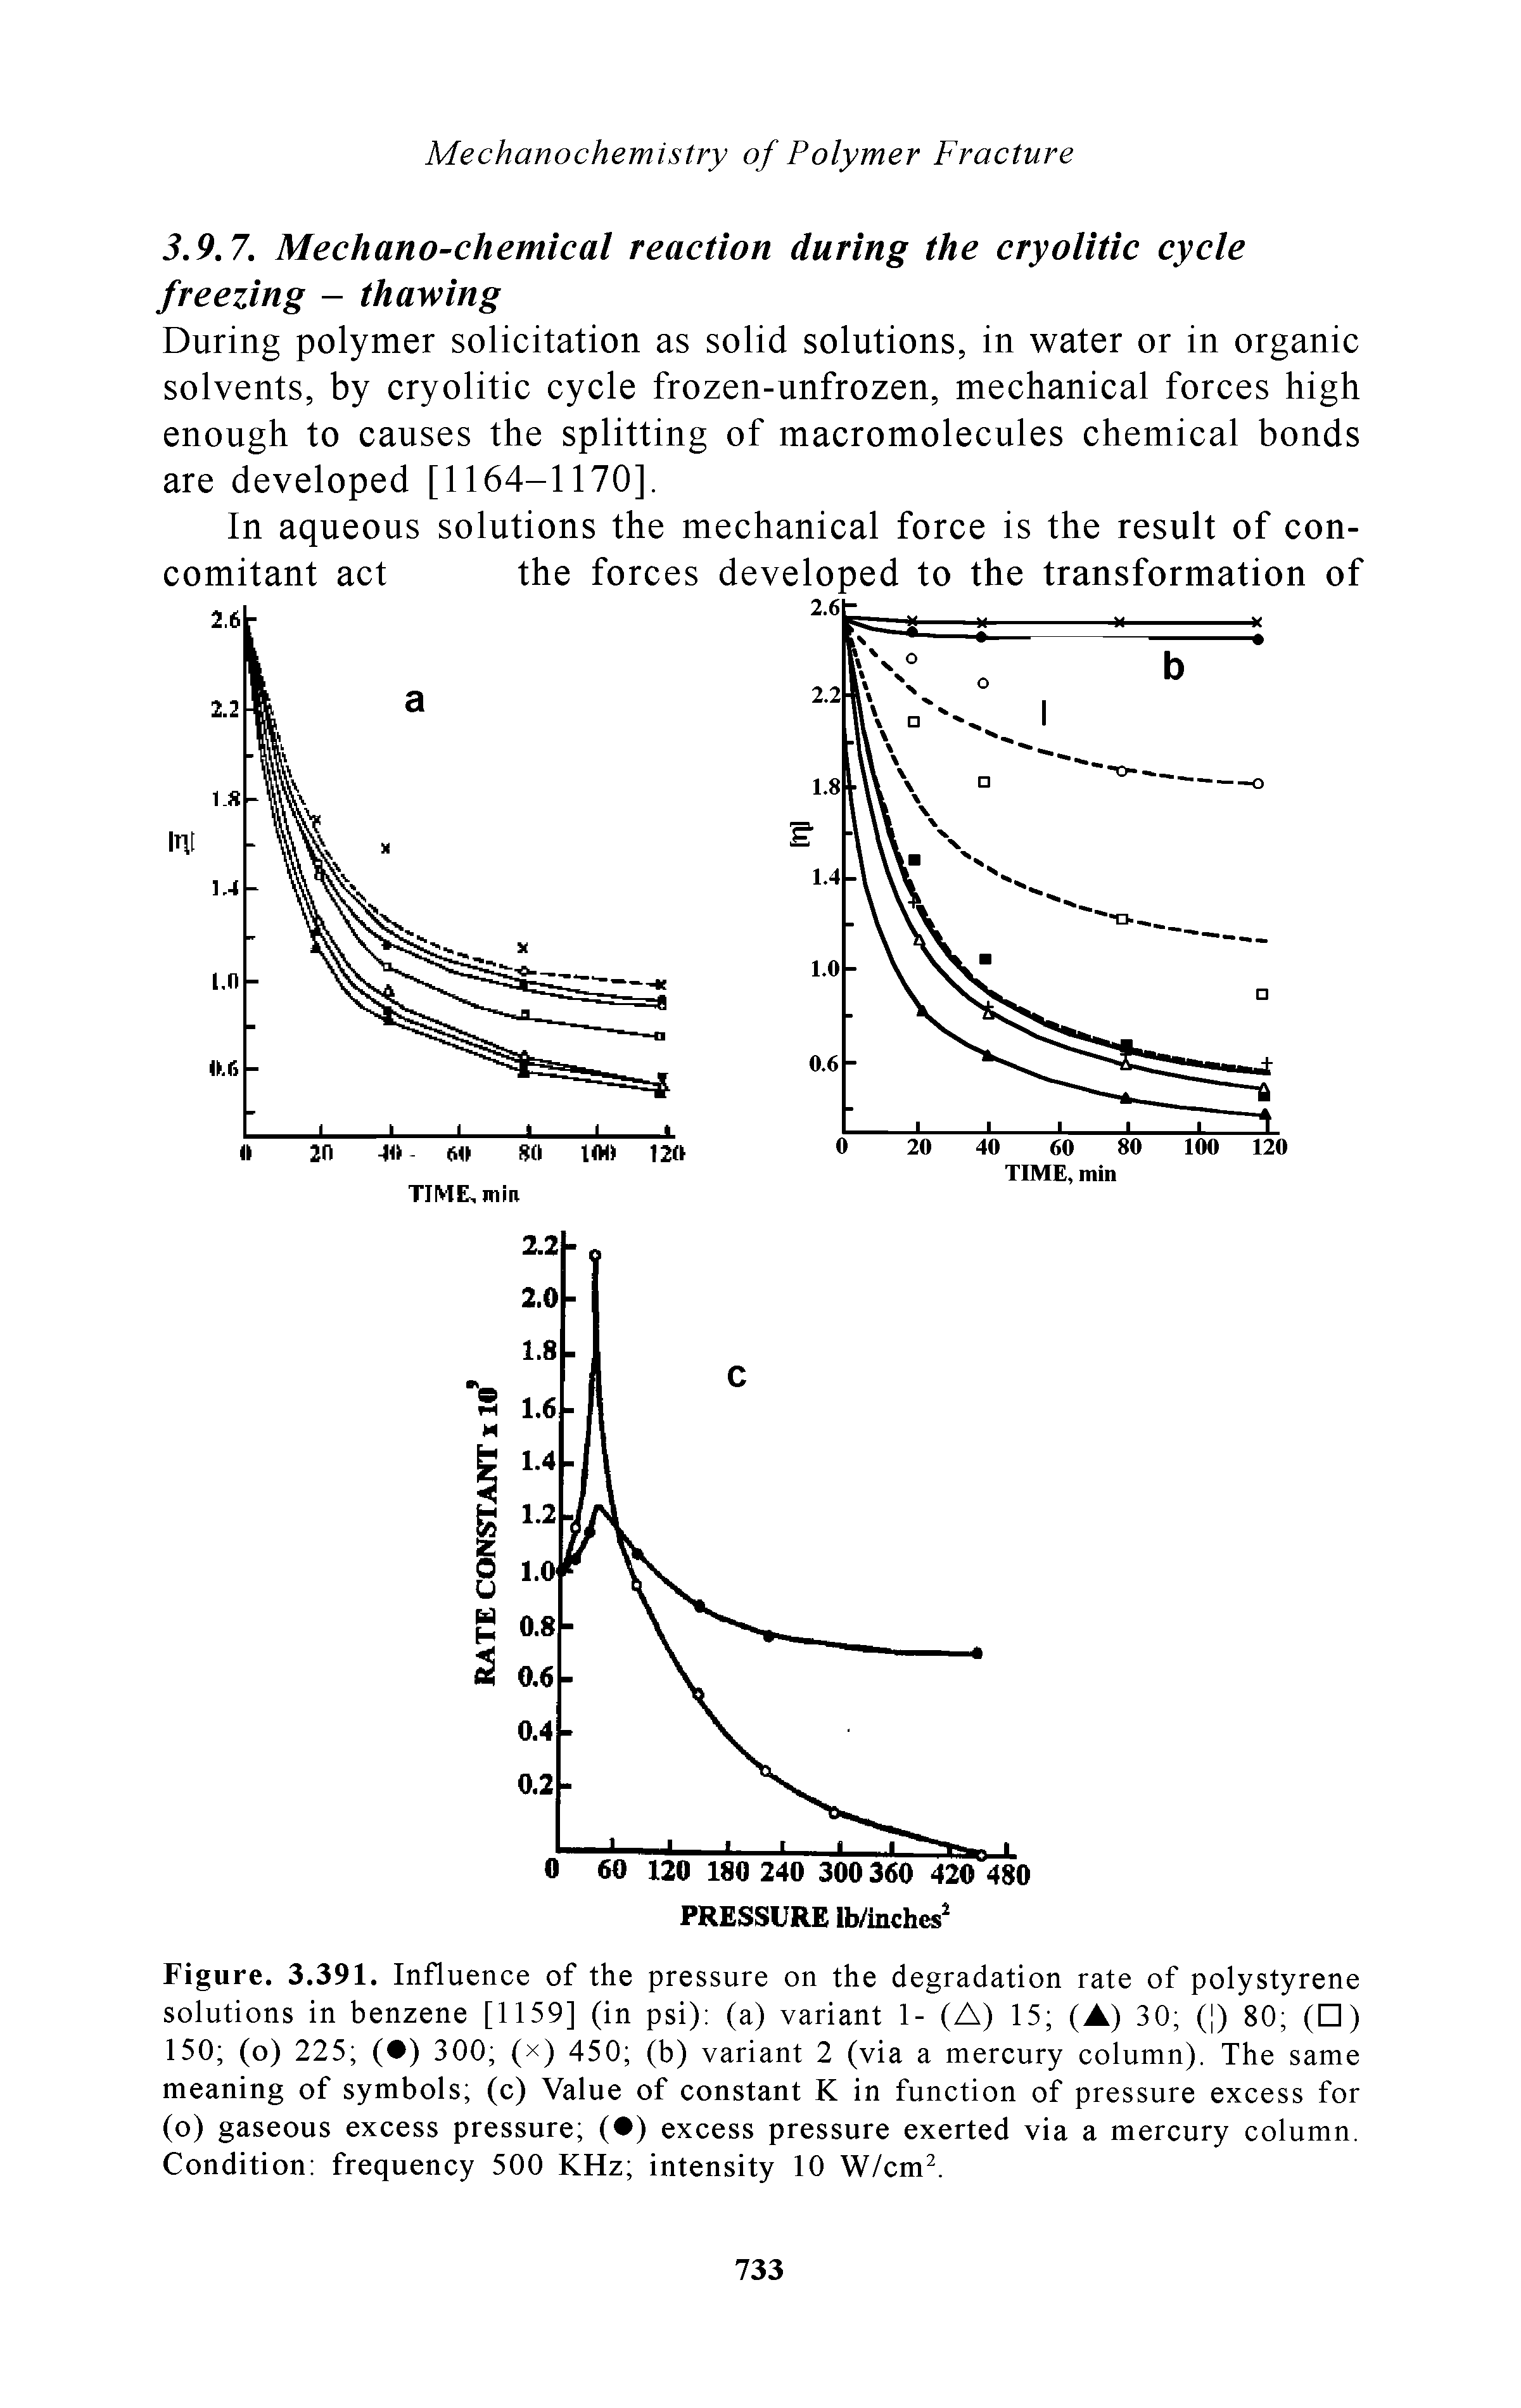 Figure. 3.391. Influence of the pressure on the degradation rate of polystyrene solutions in benzene [1159] (in psi) (a) variant 1- (A) 15 (A) 30 (j) 80 ( ) 150 (o) 225 ( ) 300 (x) 450 (b) variant 2 (via a mercury column). The same meaning of symbols (c) Value of constant K in function of pressure excess for (o) gaseous excess pressure ( ) excess pressure exerted via a mercury column. Condition frequency 500 KHz intensity 10 W/cm. ...